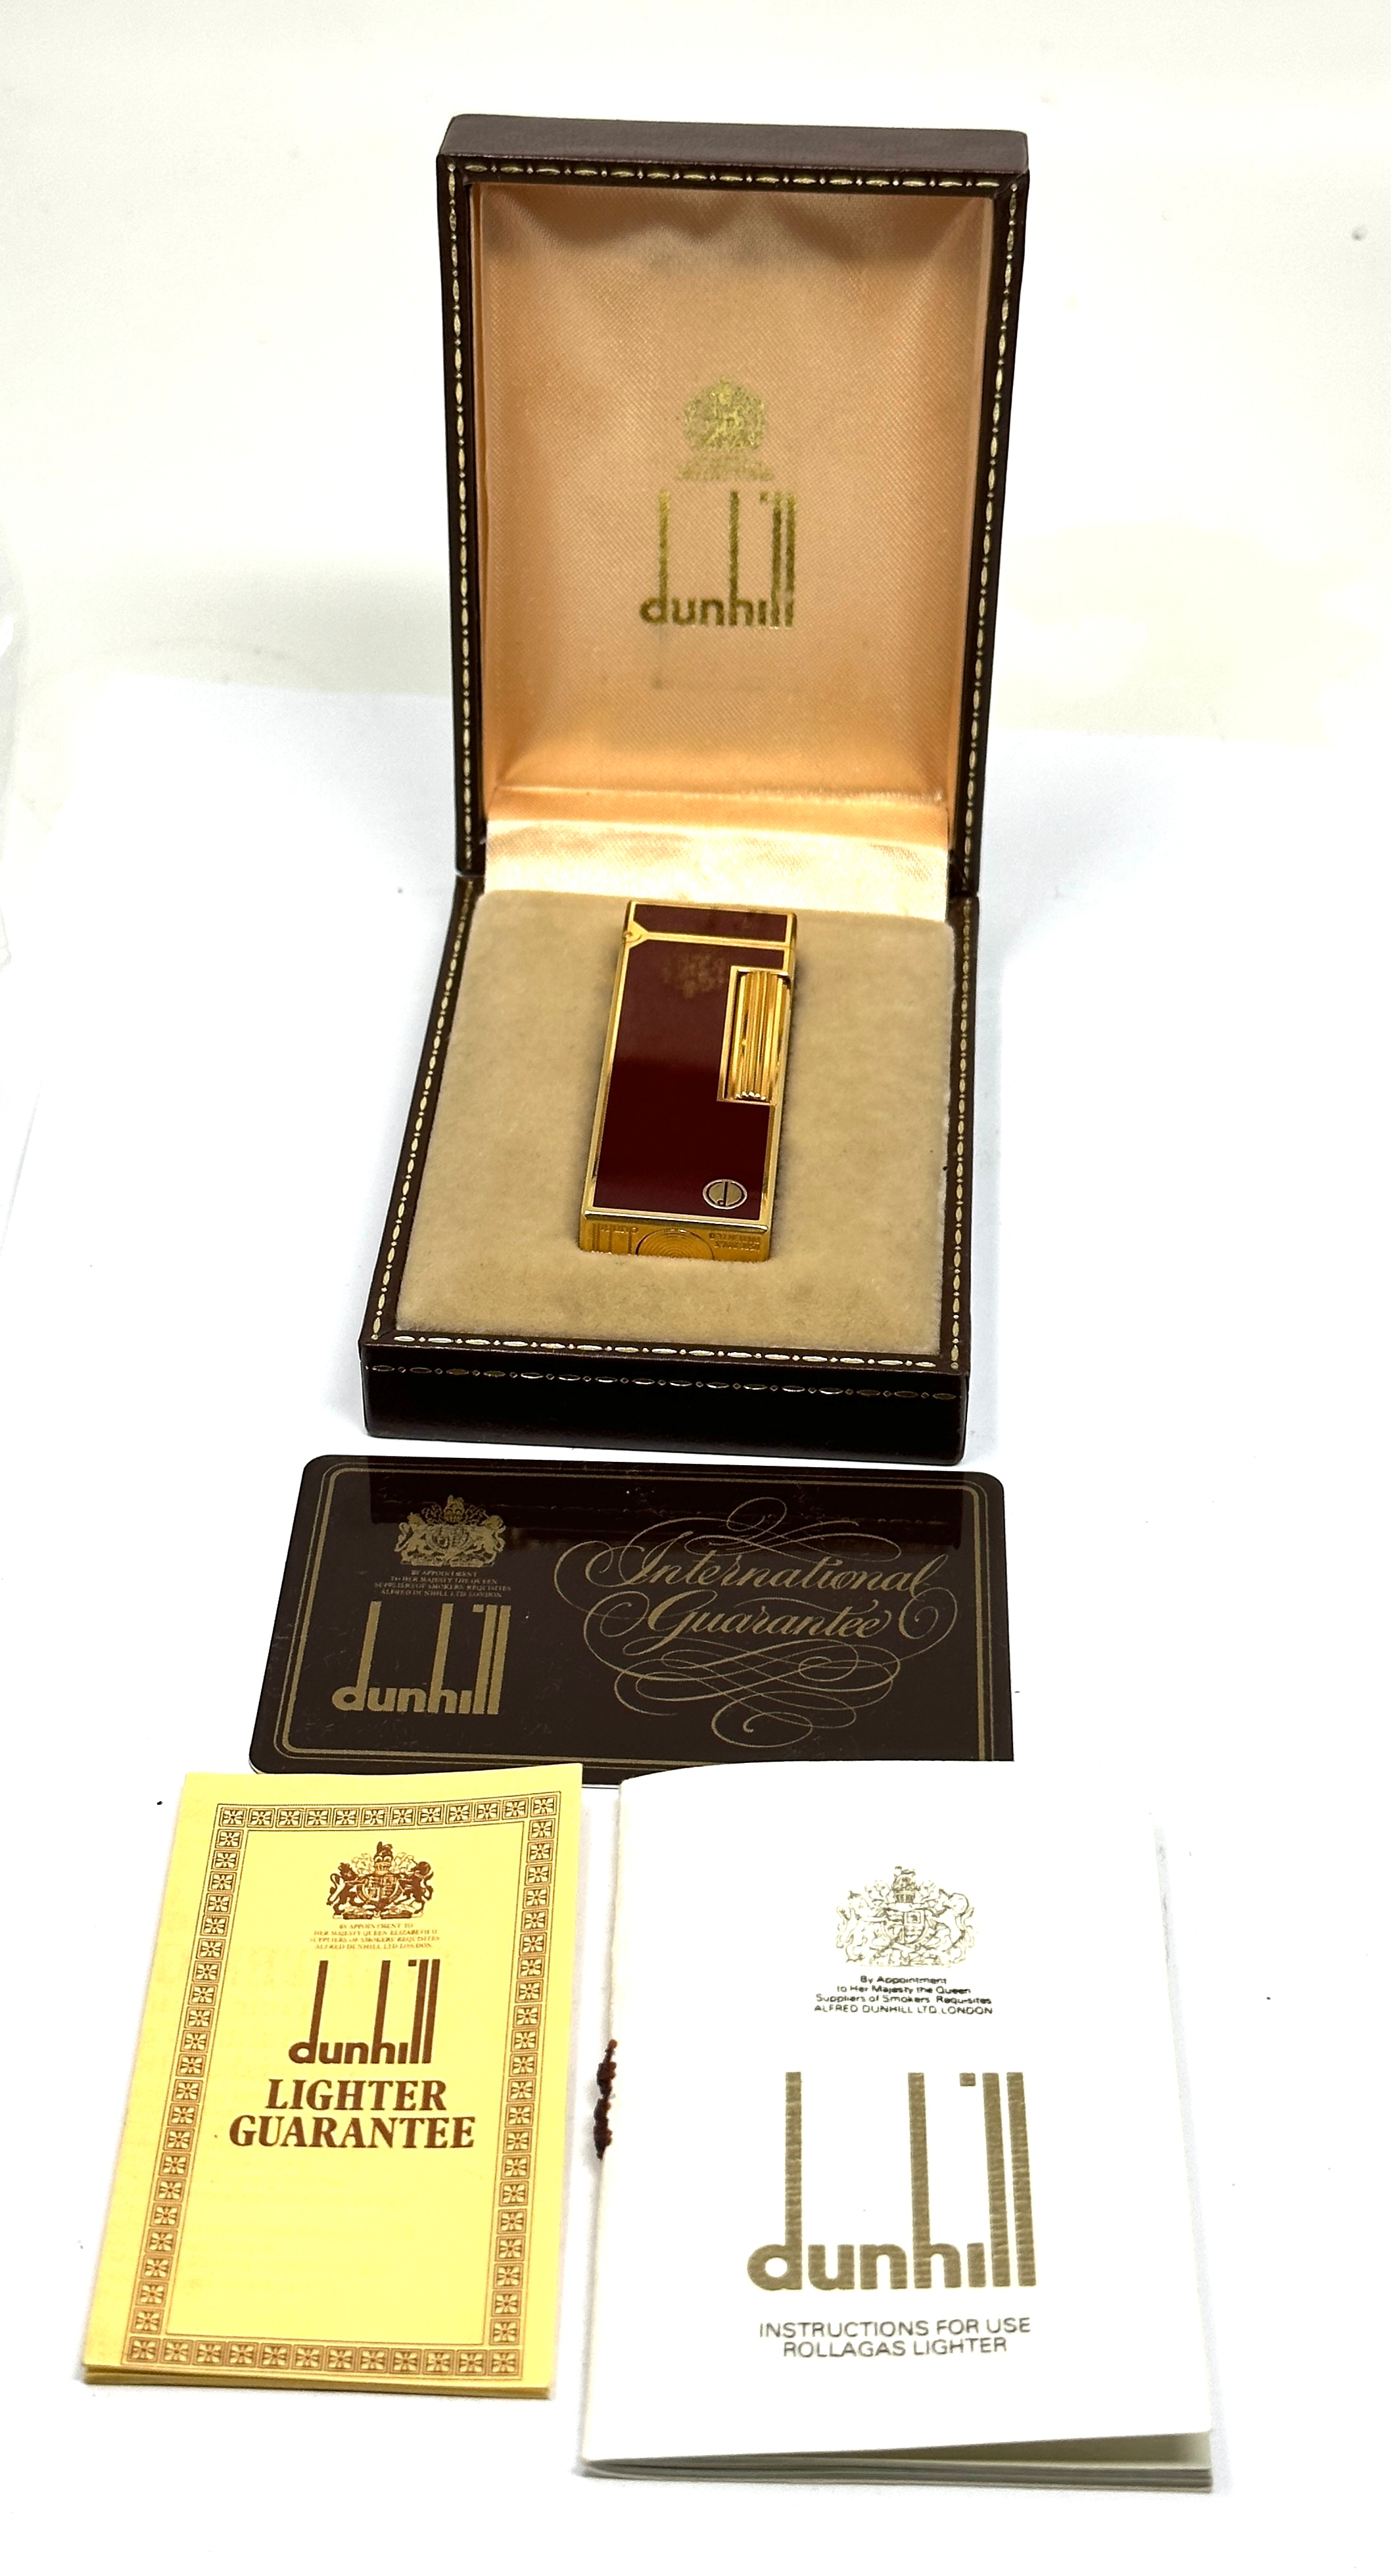 Boxed Dunhill Red Laquer Enamel Rollagas Lighter US.RE 24163 - Image 8 of 9